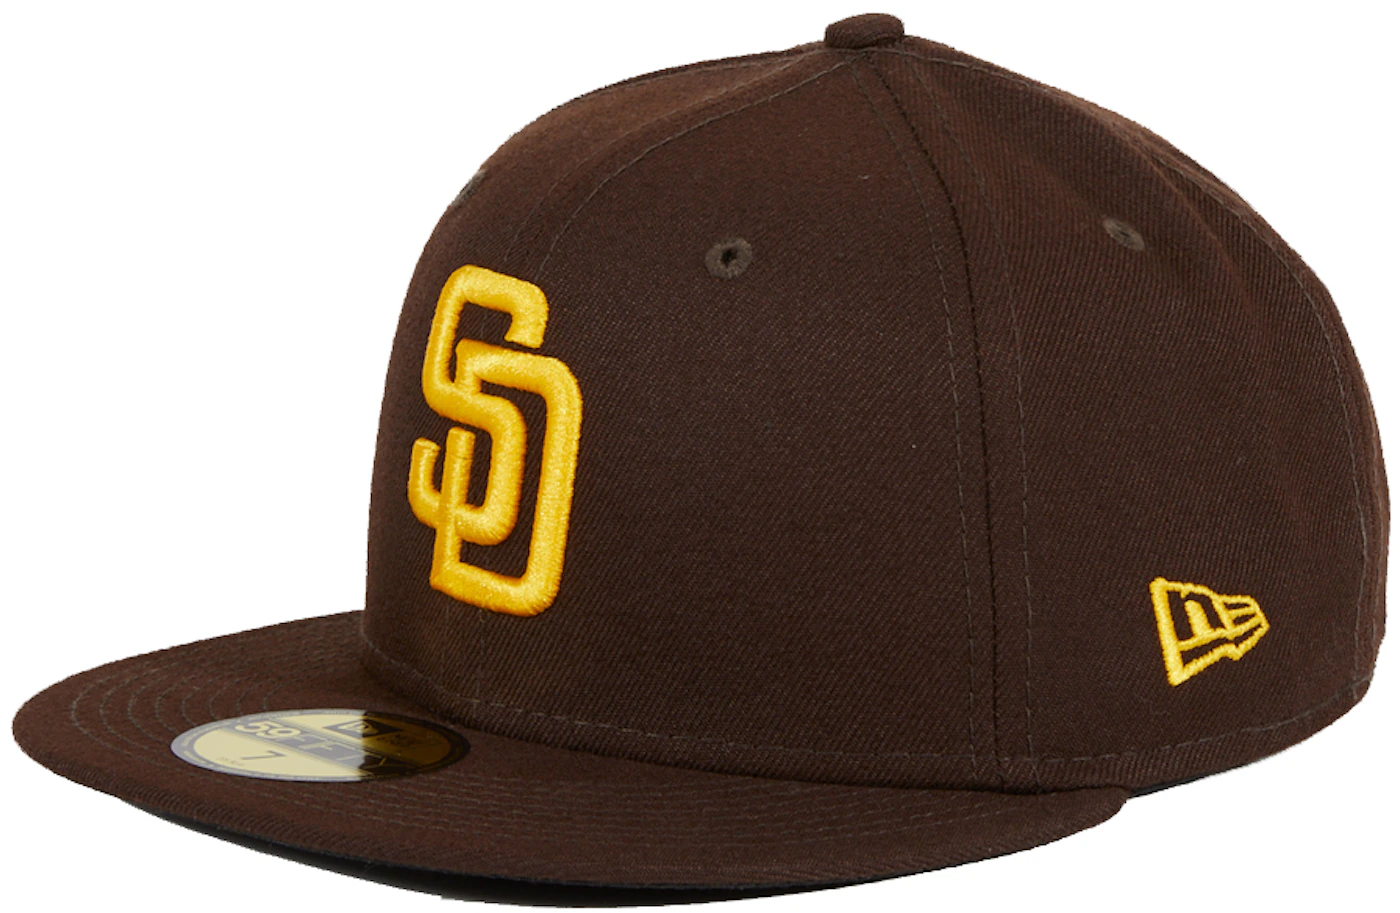 San Diego Padres Fanatics Branded Fitted Hat - Natural/Brown